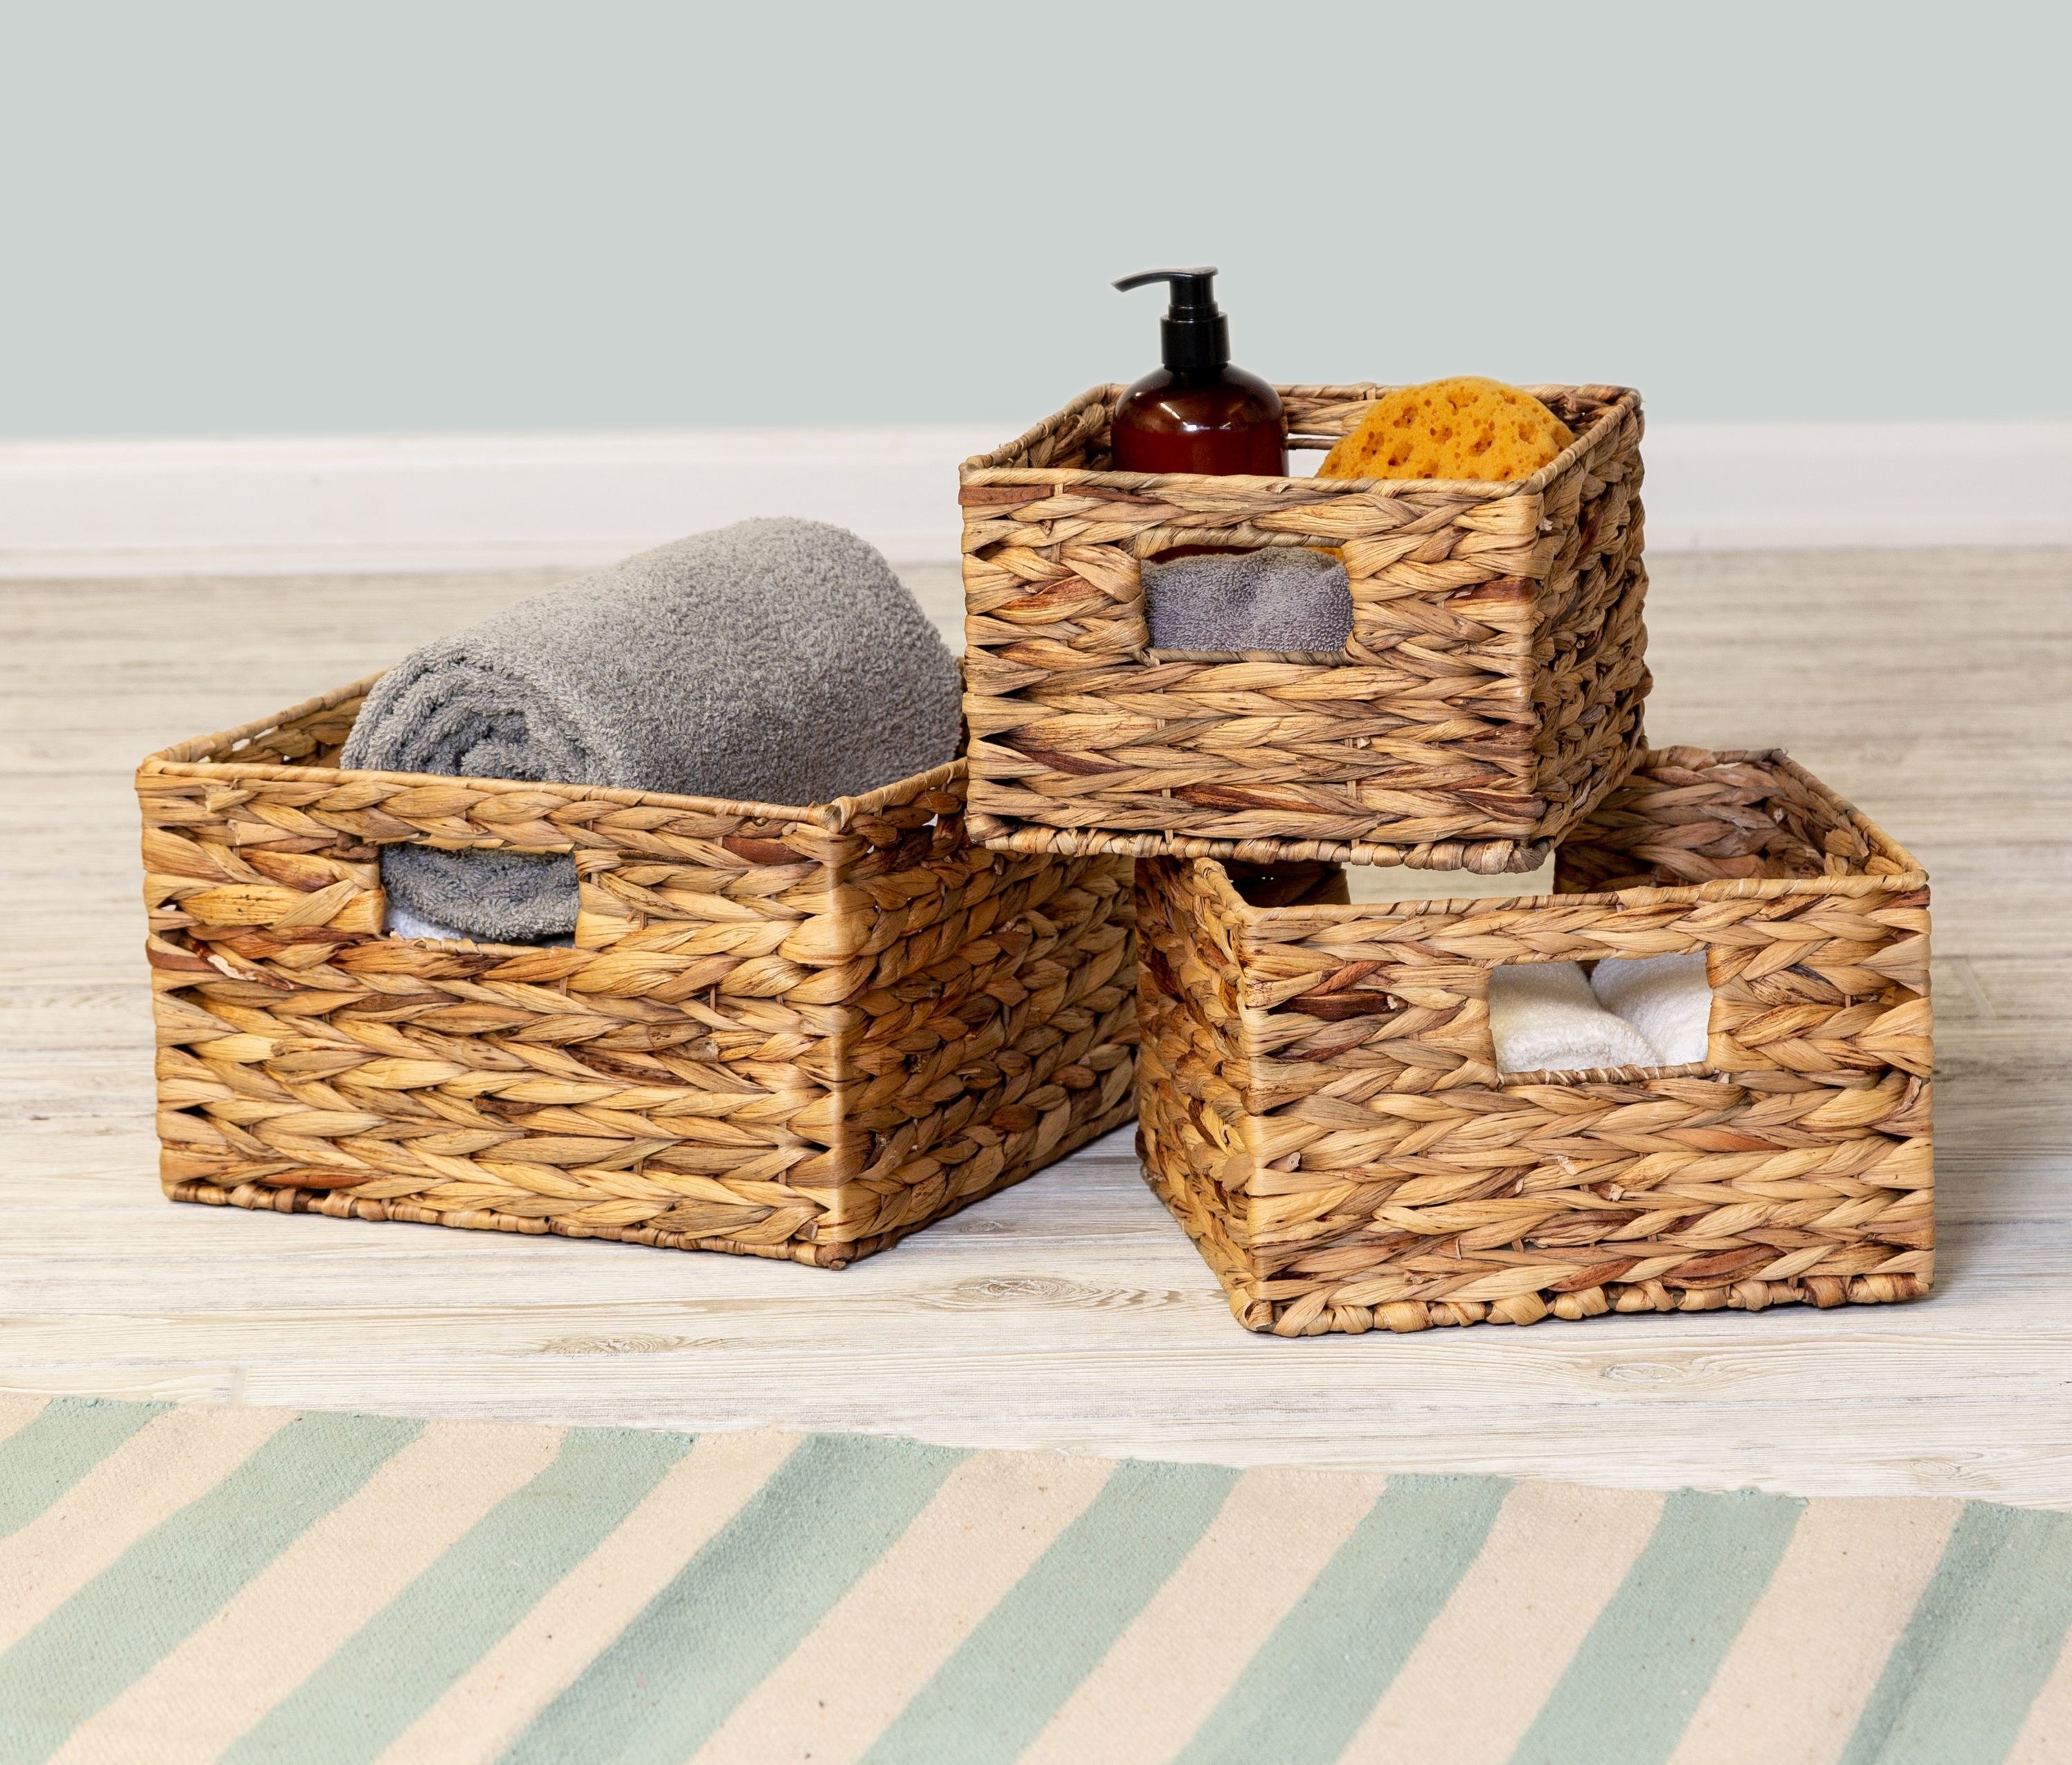 Three woven baskets with miscellaneous bath products inside